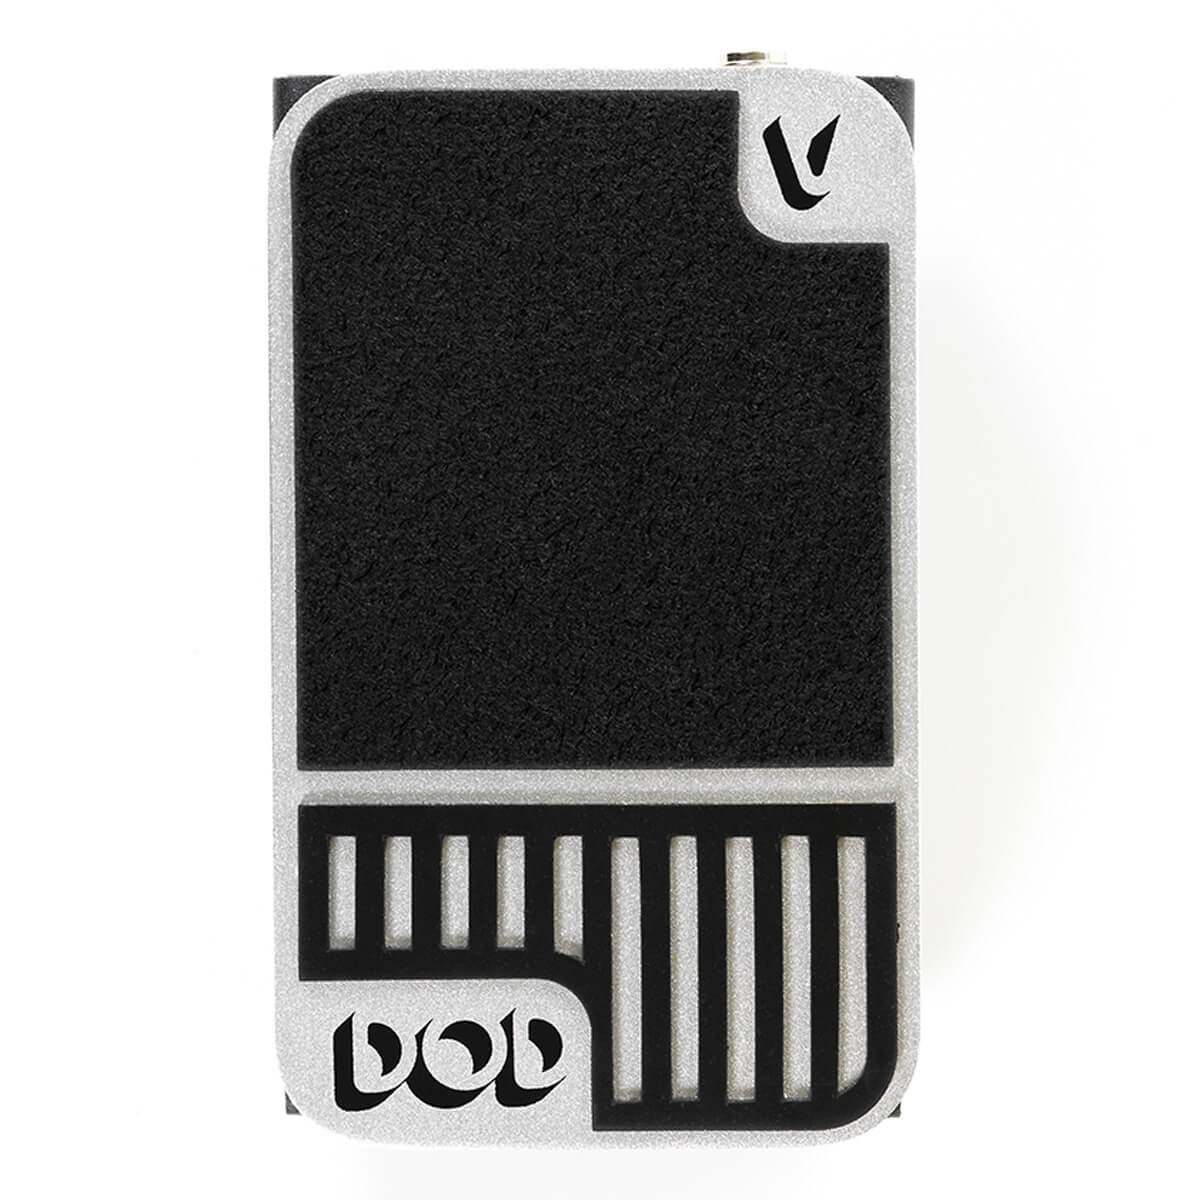 DOD Mini Volume ultra compact volume guitar pedal in black and silver. Top view